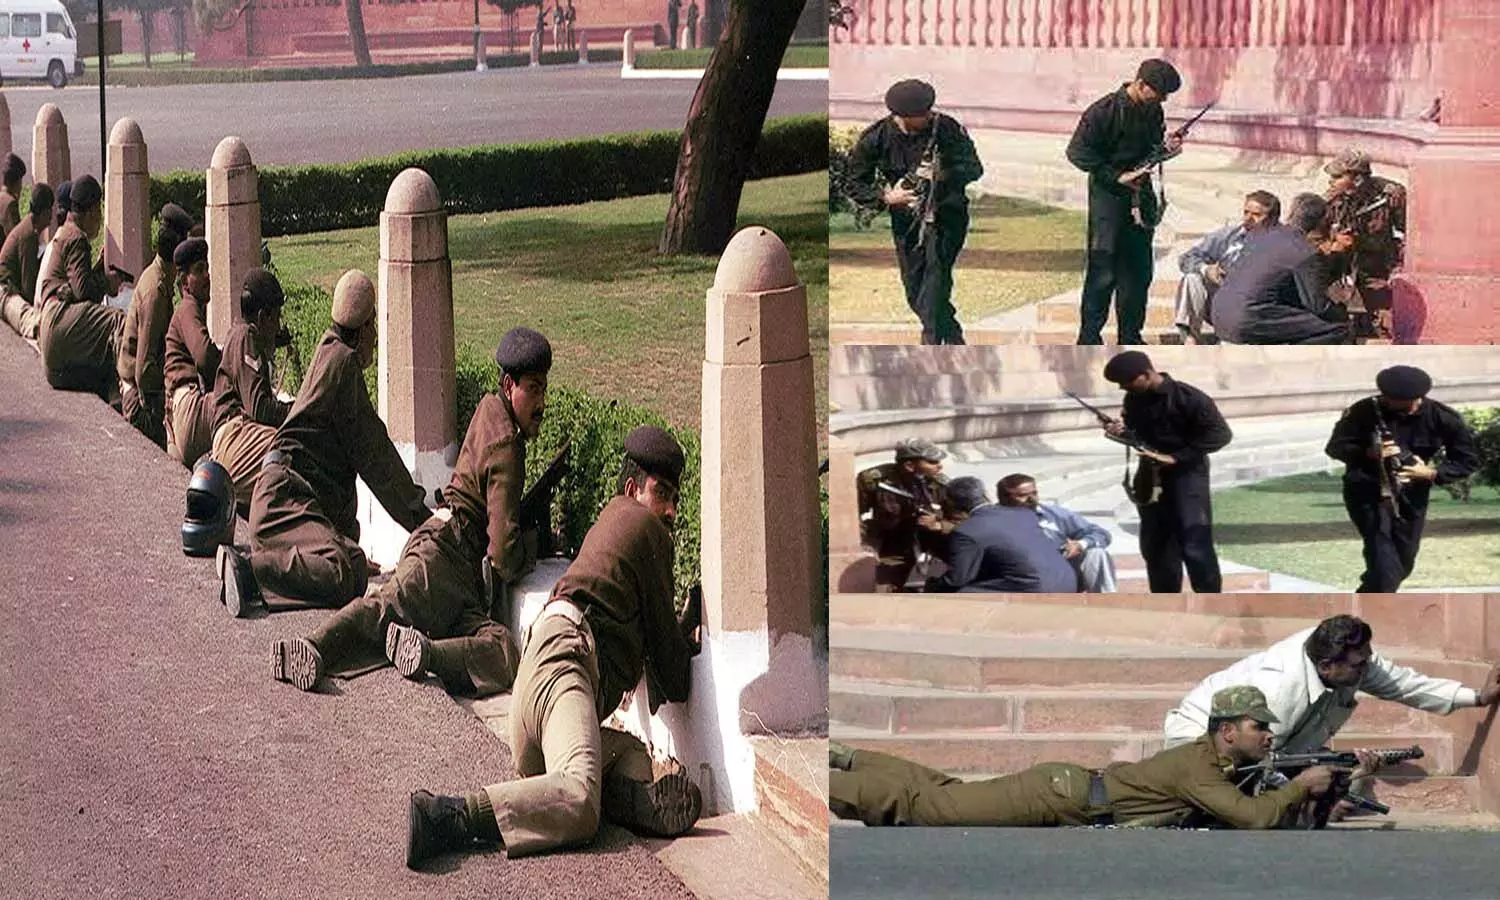 Indian Parliament was attacked on this day 13 December in 2001